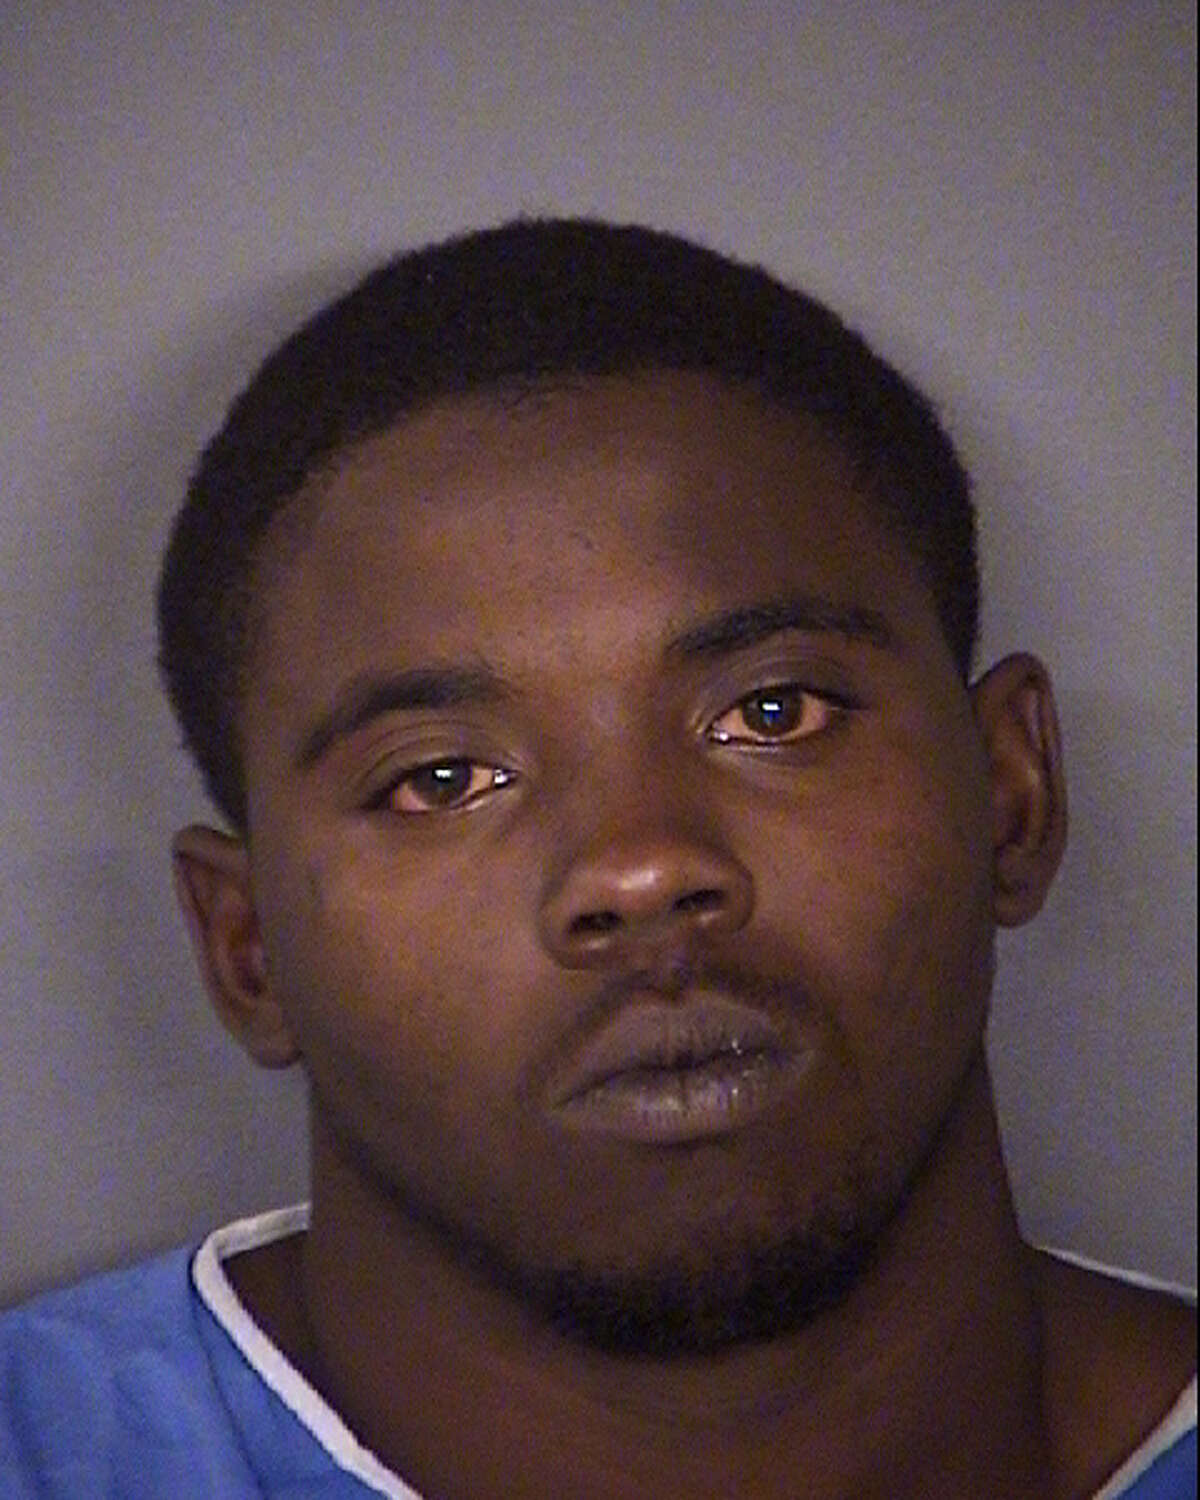 Rico Stewart of San Antonio currently two felony assault charges in connection with the shooting, one felony drug charge, one felony theft charge and a misdemeanor marijuana possession charge. He remains in the Bexar County Jail on a $16,000 bond.